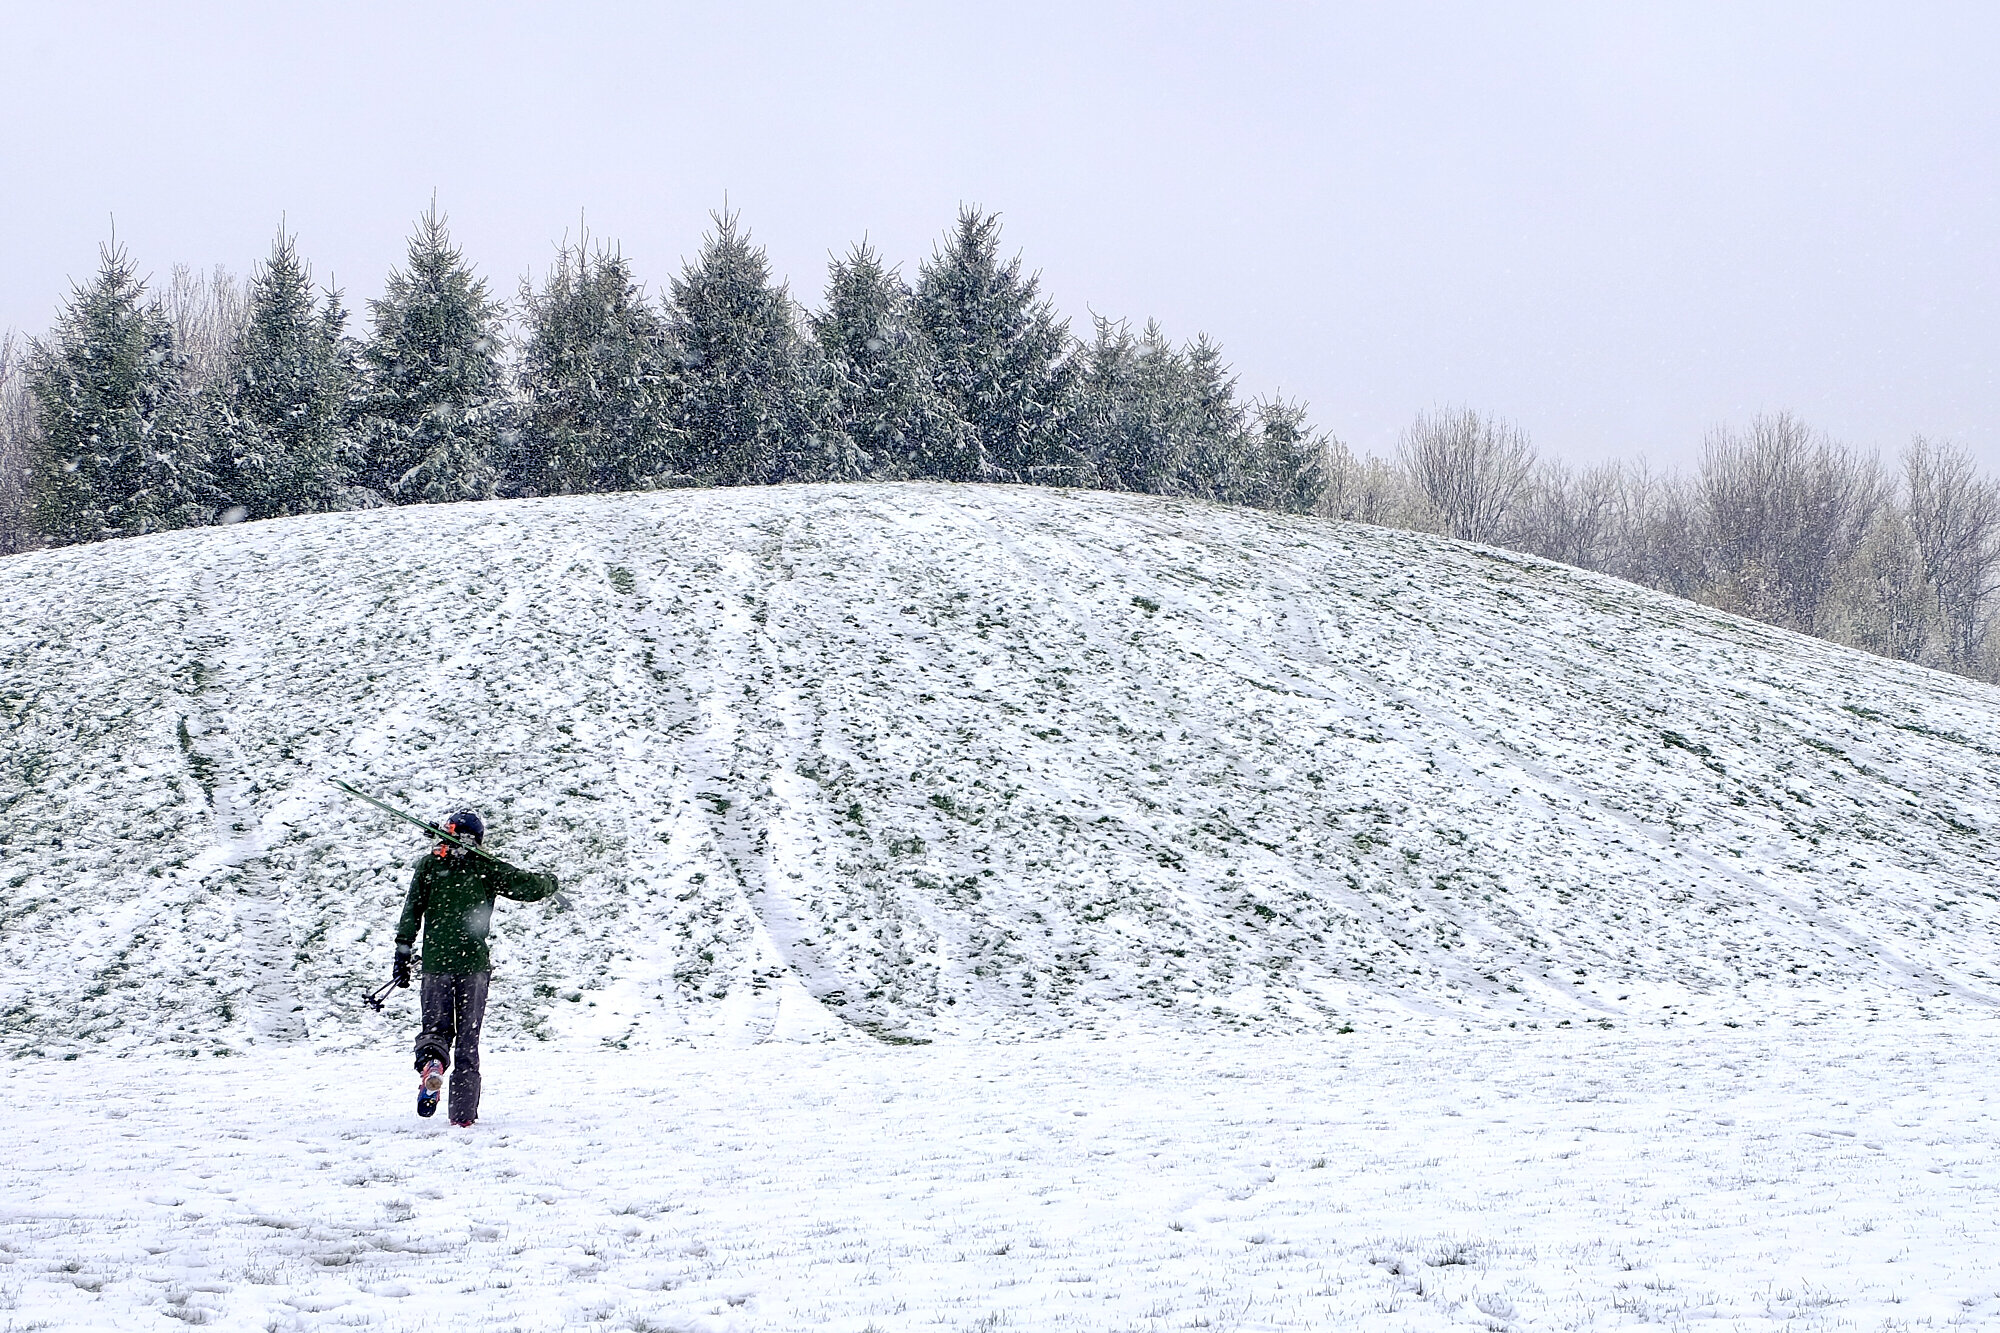  A late season flurry dropped some snow on the old rec center sledding hill. It only stuck for a couple of hours, but I still managed to get some turns in! I can reasonably confidently say I am the only person to have telemark skied this face. (Photo